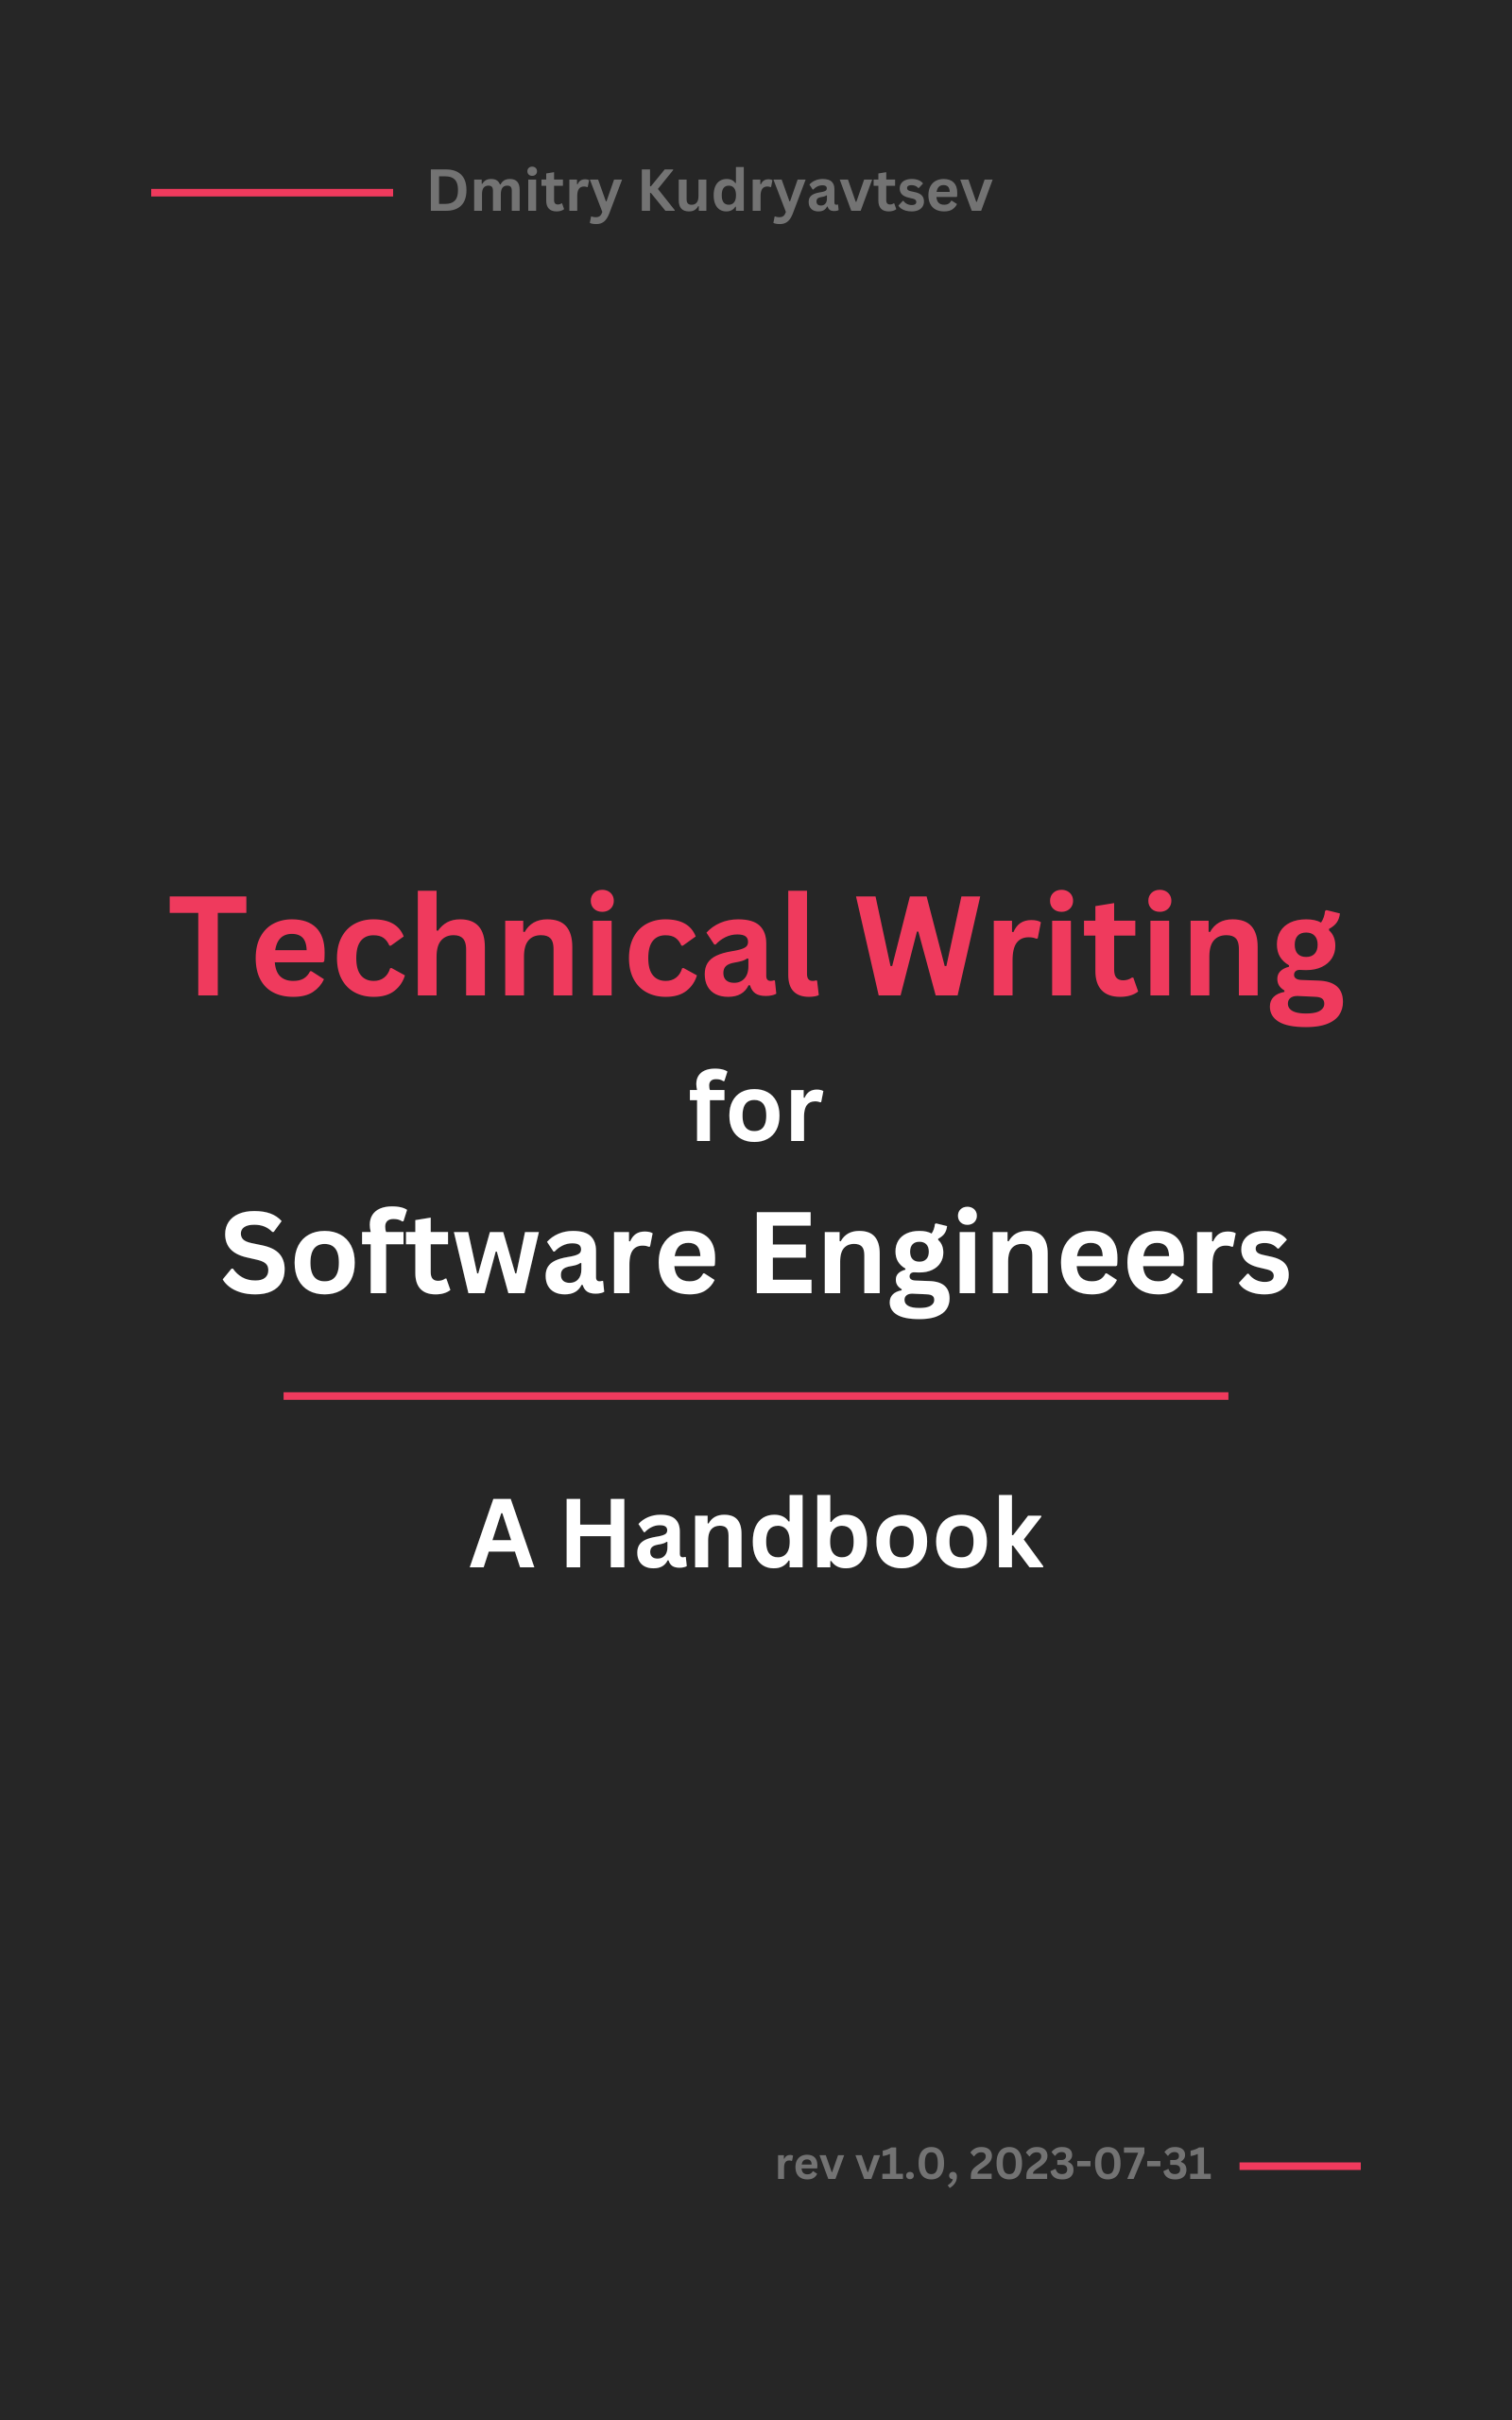 Technical Writing for Software Engineers - A Handbook